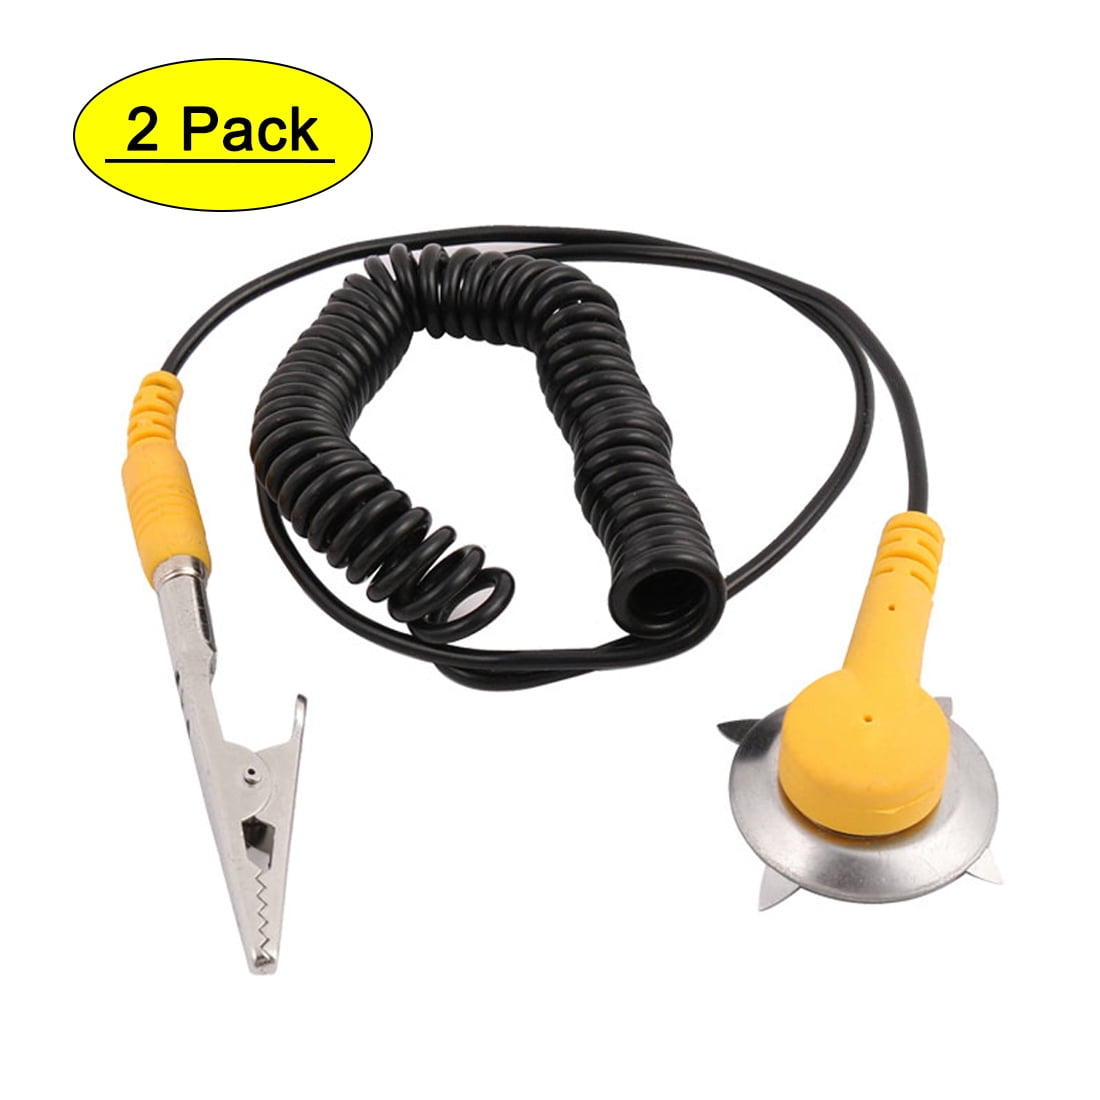 2 PCS Anti-Static Coil Cable Anti Static ESD Mats Grounding Point Cord 